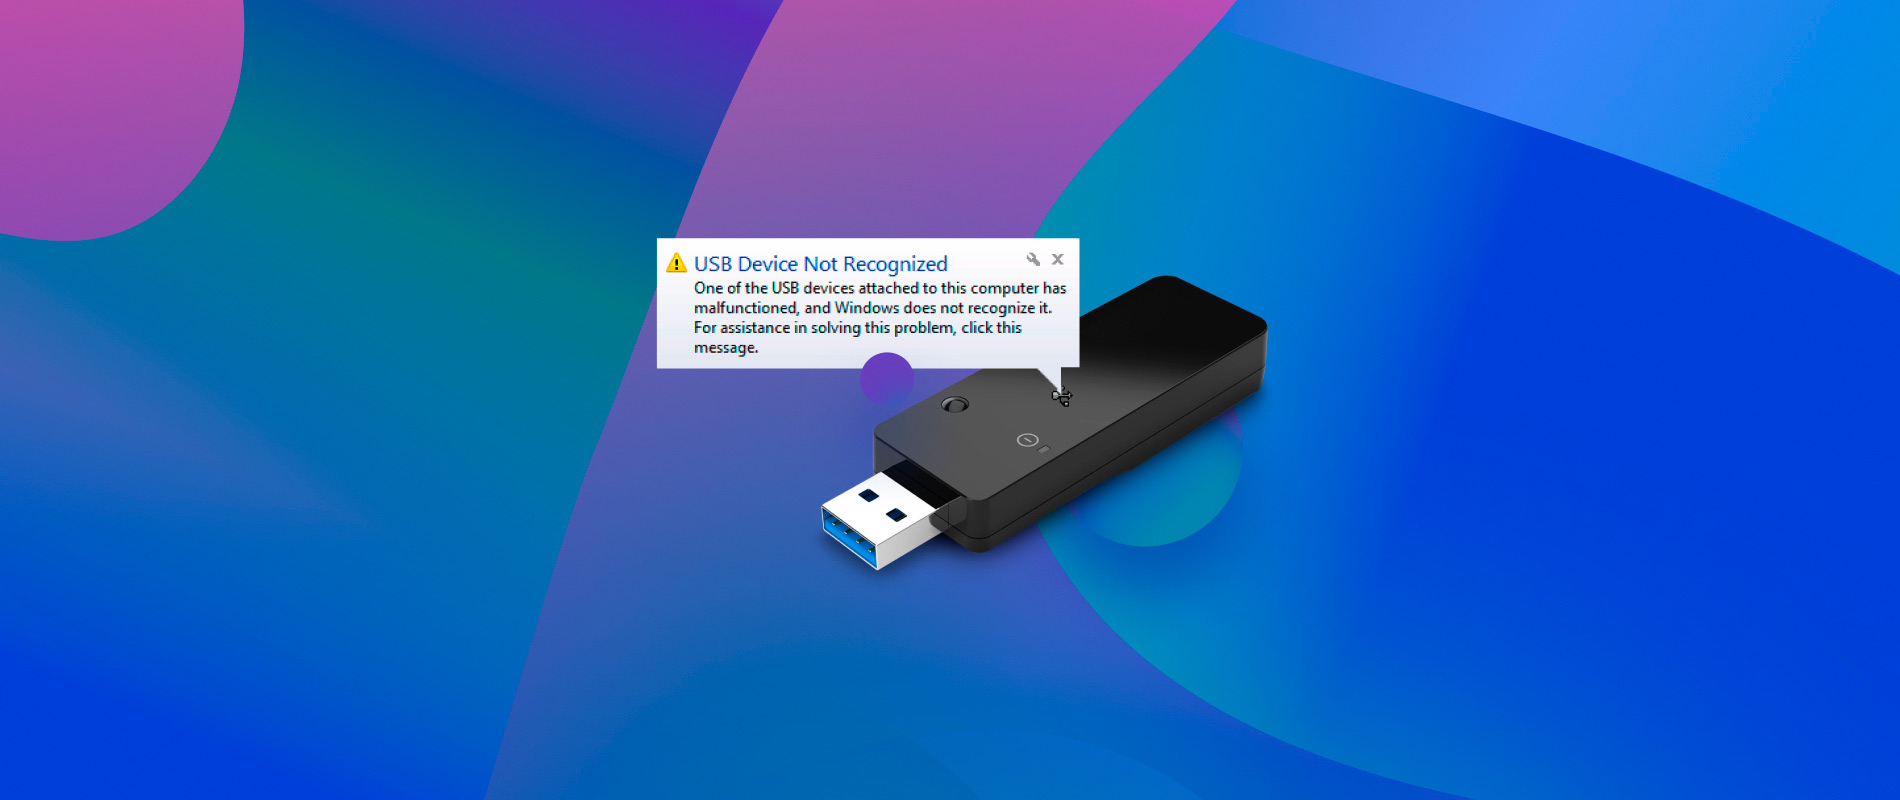 Restart the computer and see if the USB drive is recognized.
Try plugging the USB drive into a different computer to see if it is recognized.